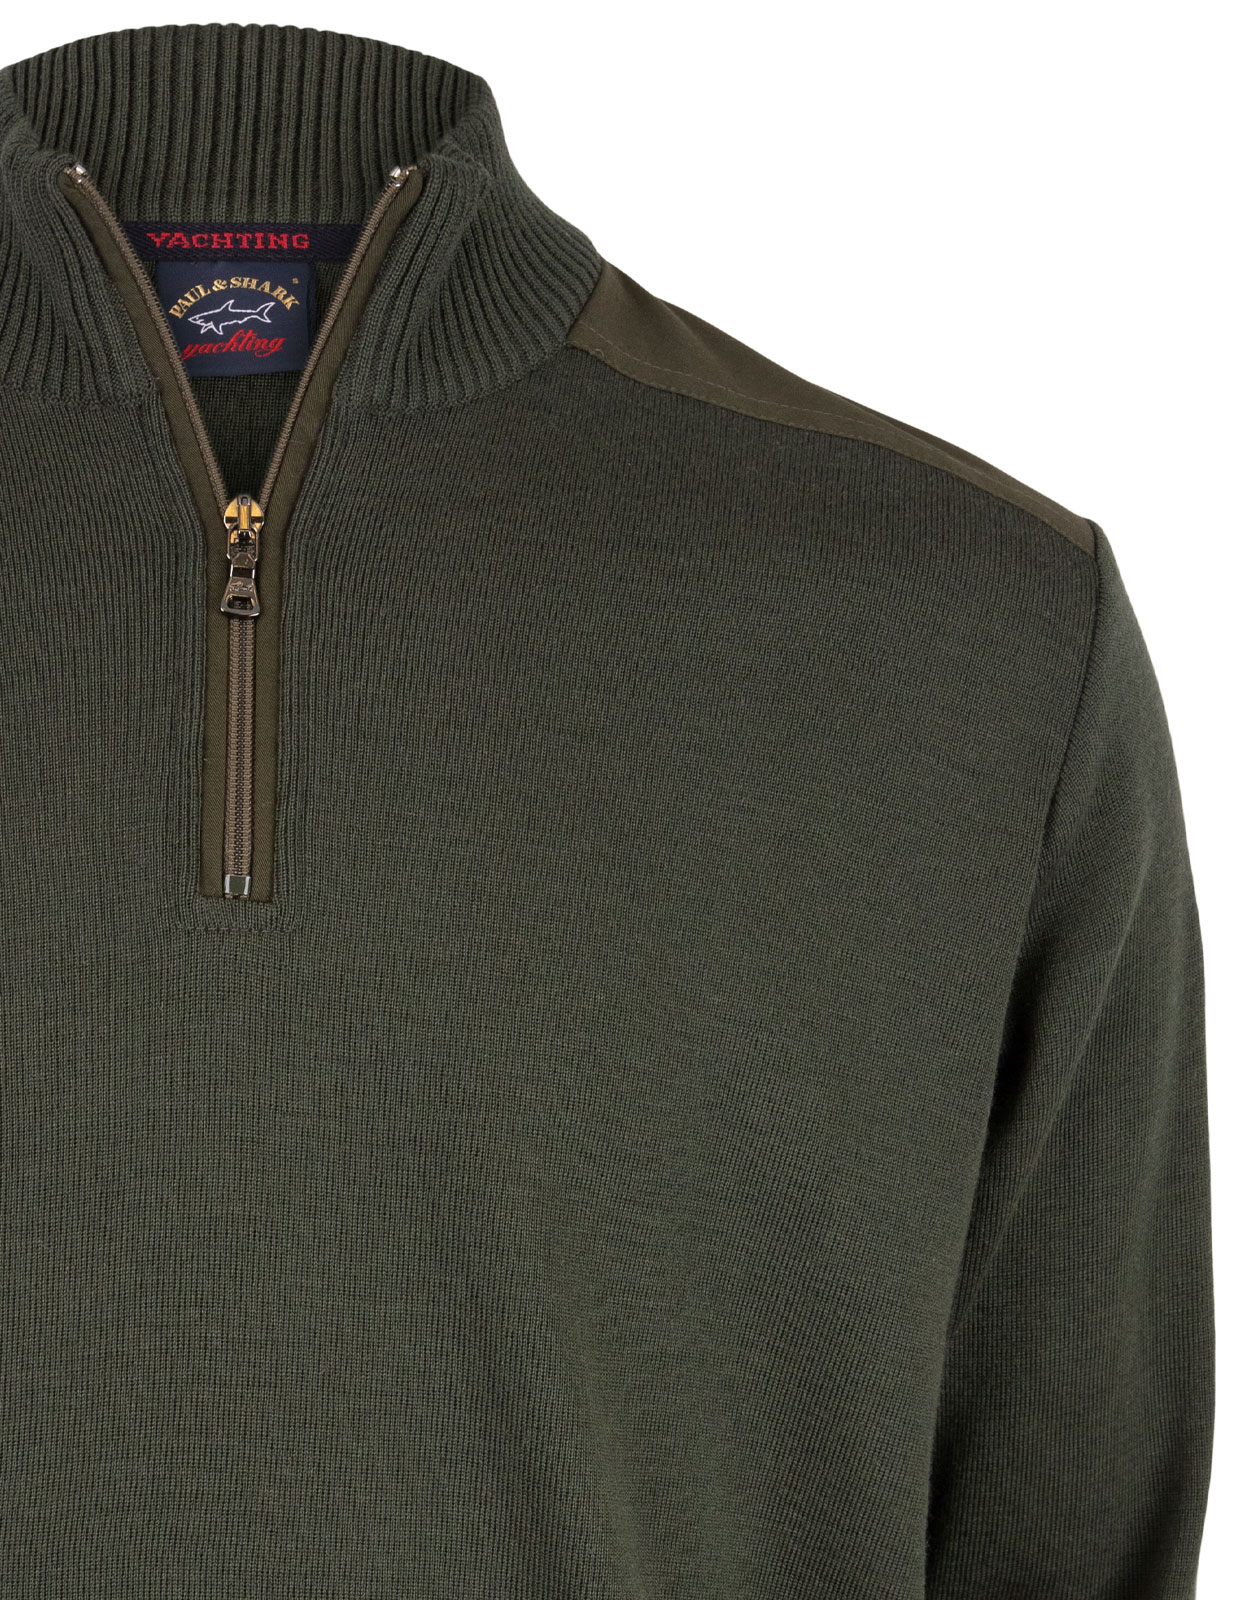 Yachting Wool Turtleneck Sweater Olive